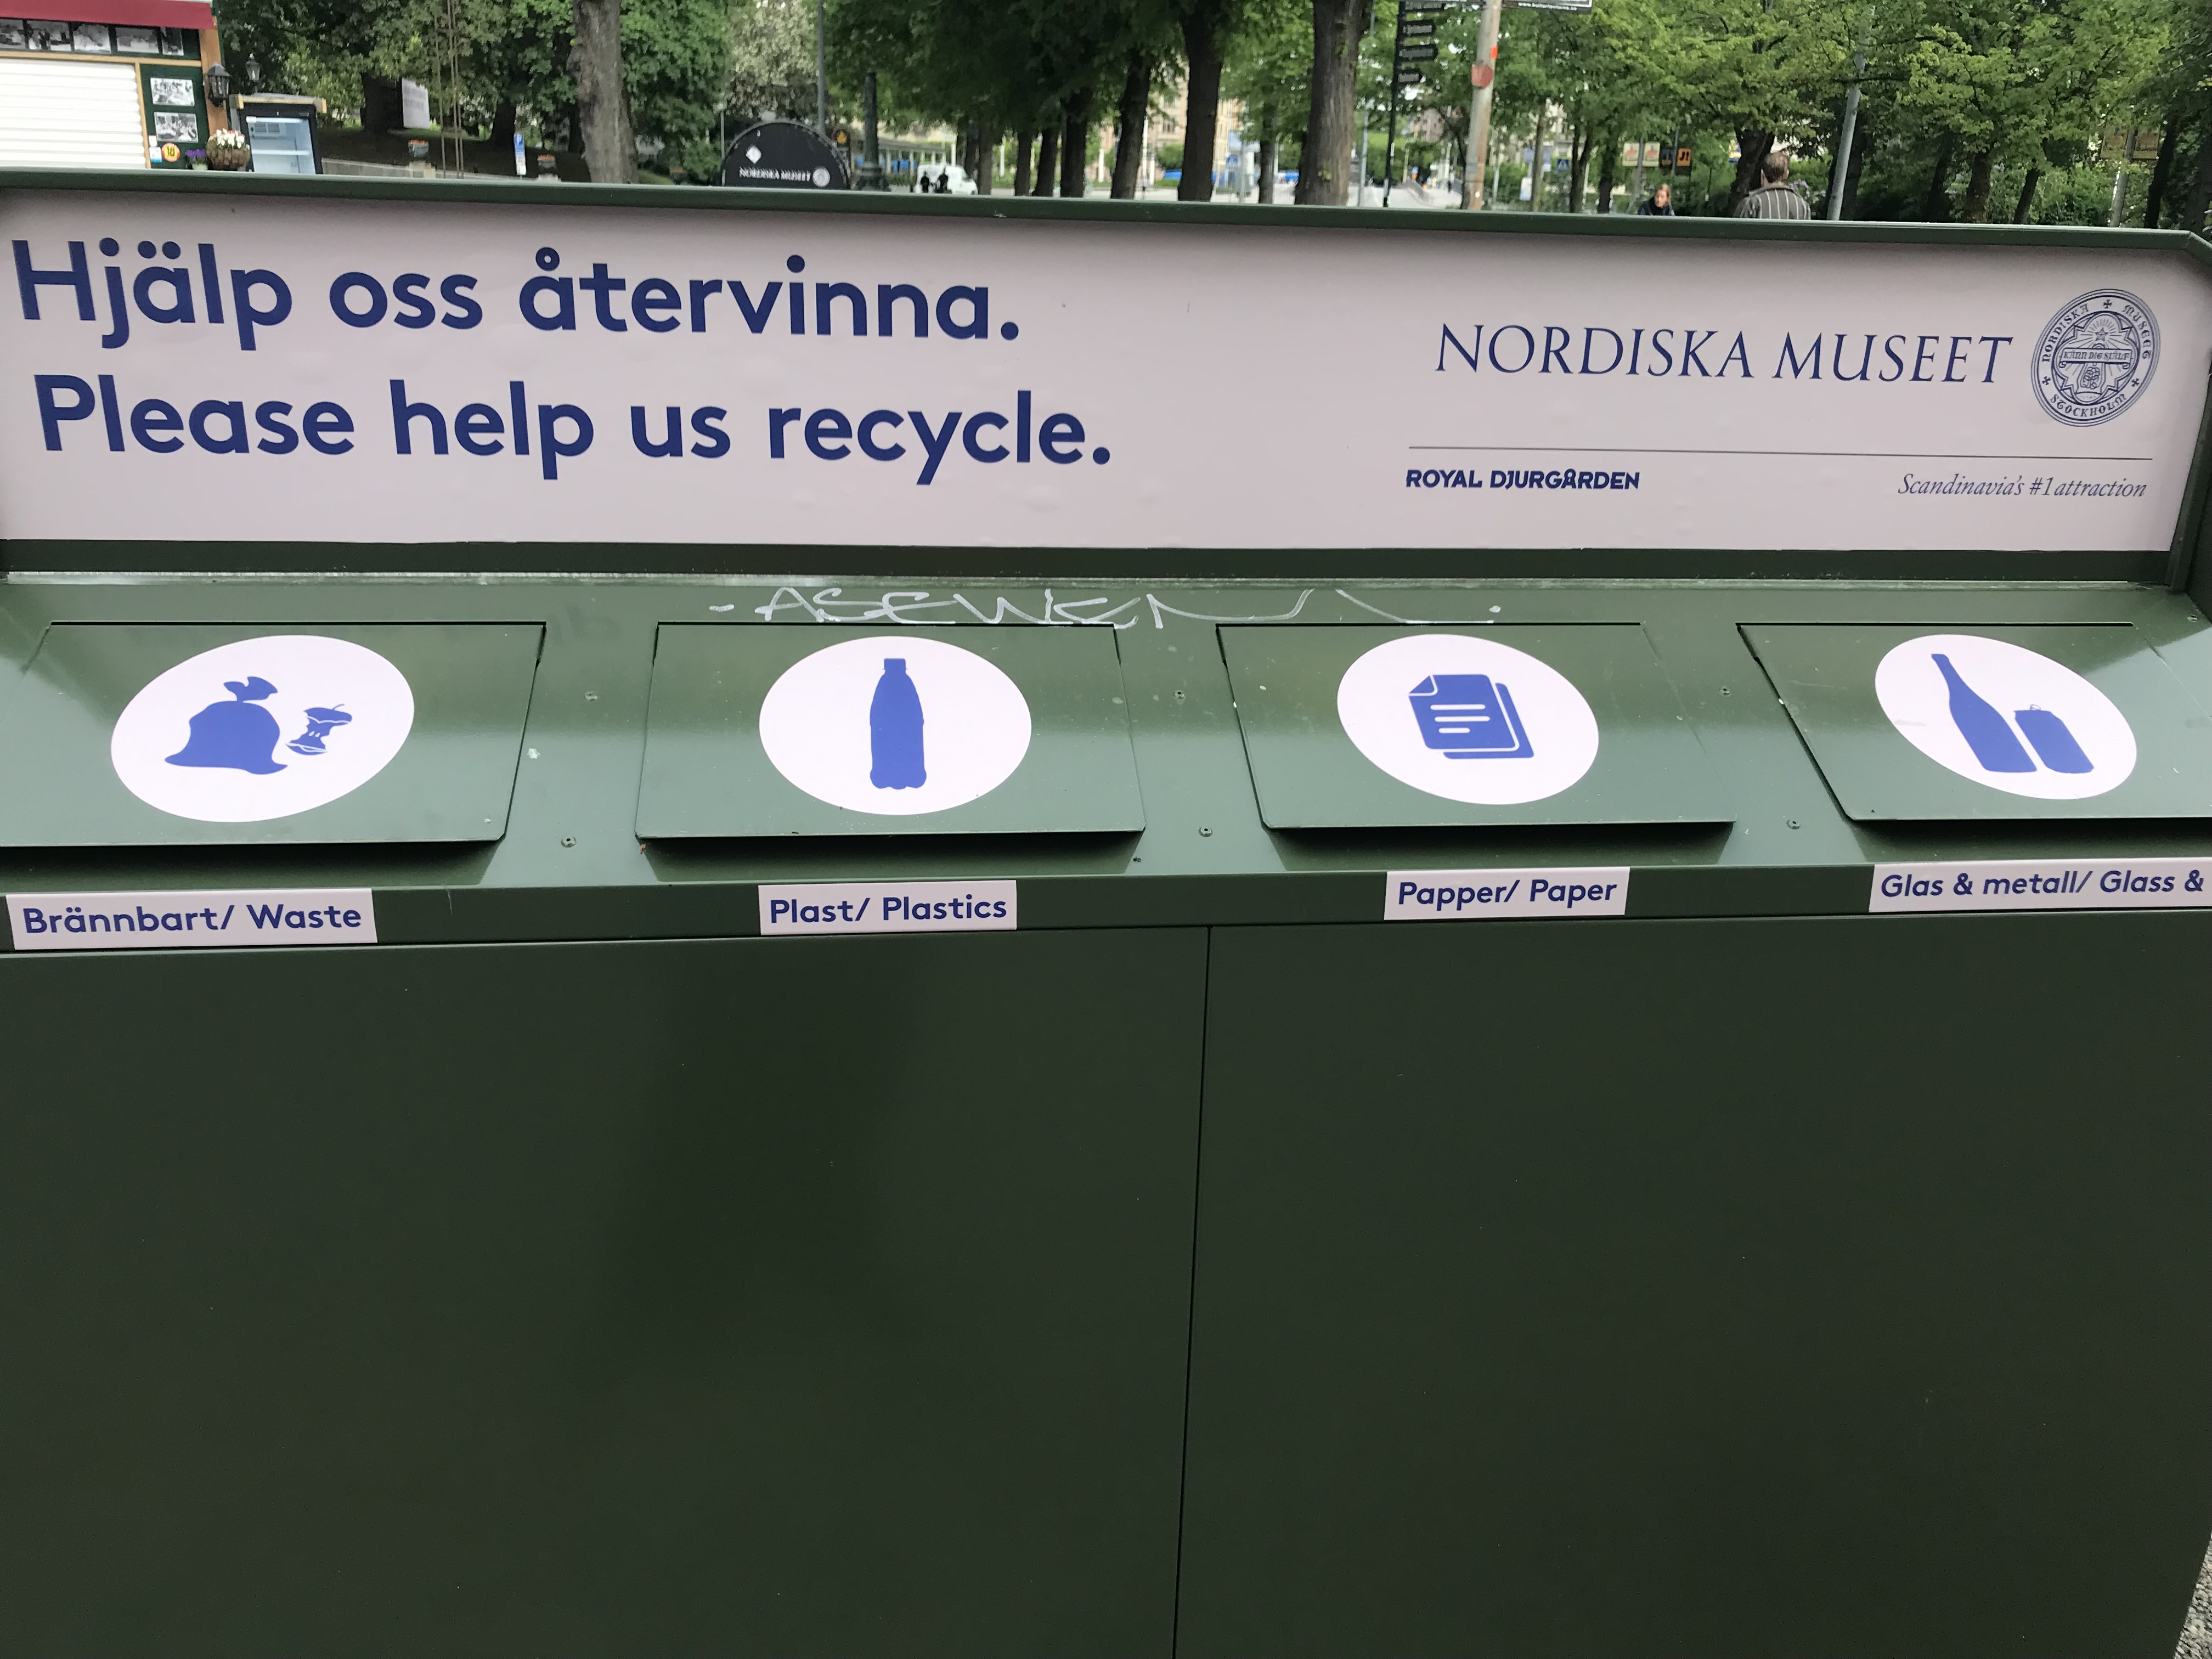 Segregated garbage bins (waste, plastics, paper, glass & metal) outside the Nordiska Museet (Nordic Museum) show how recycling can be a way of life 